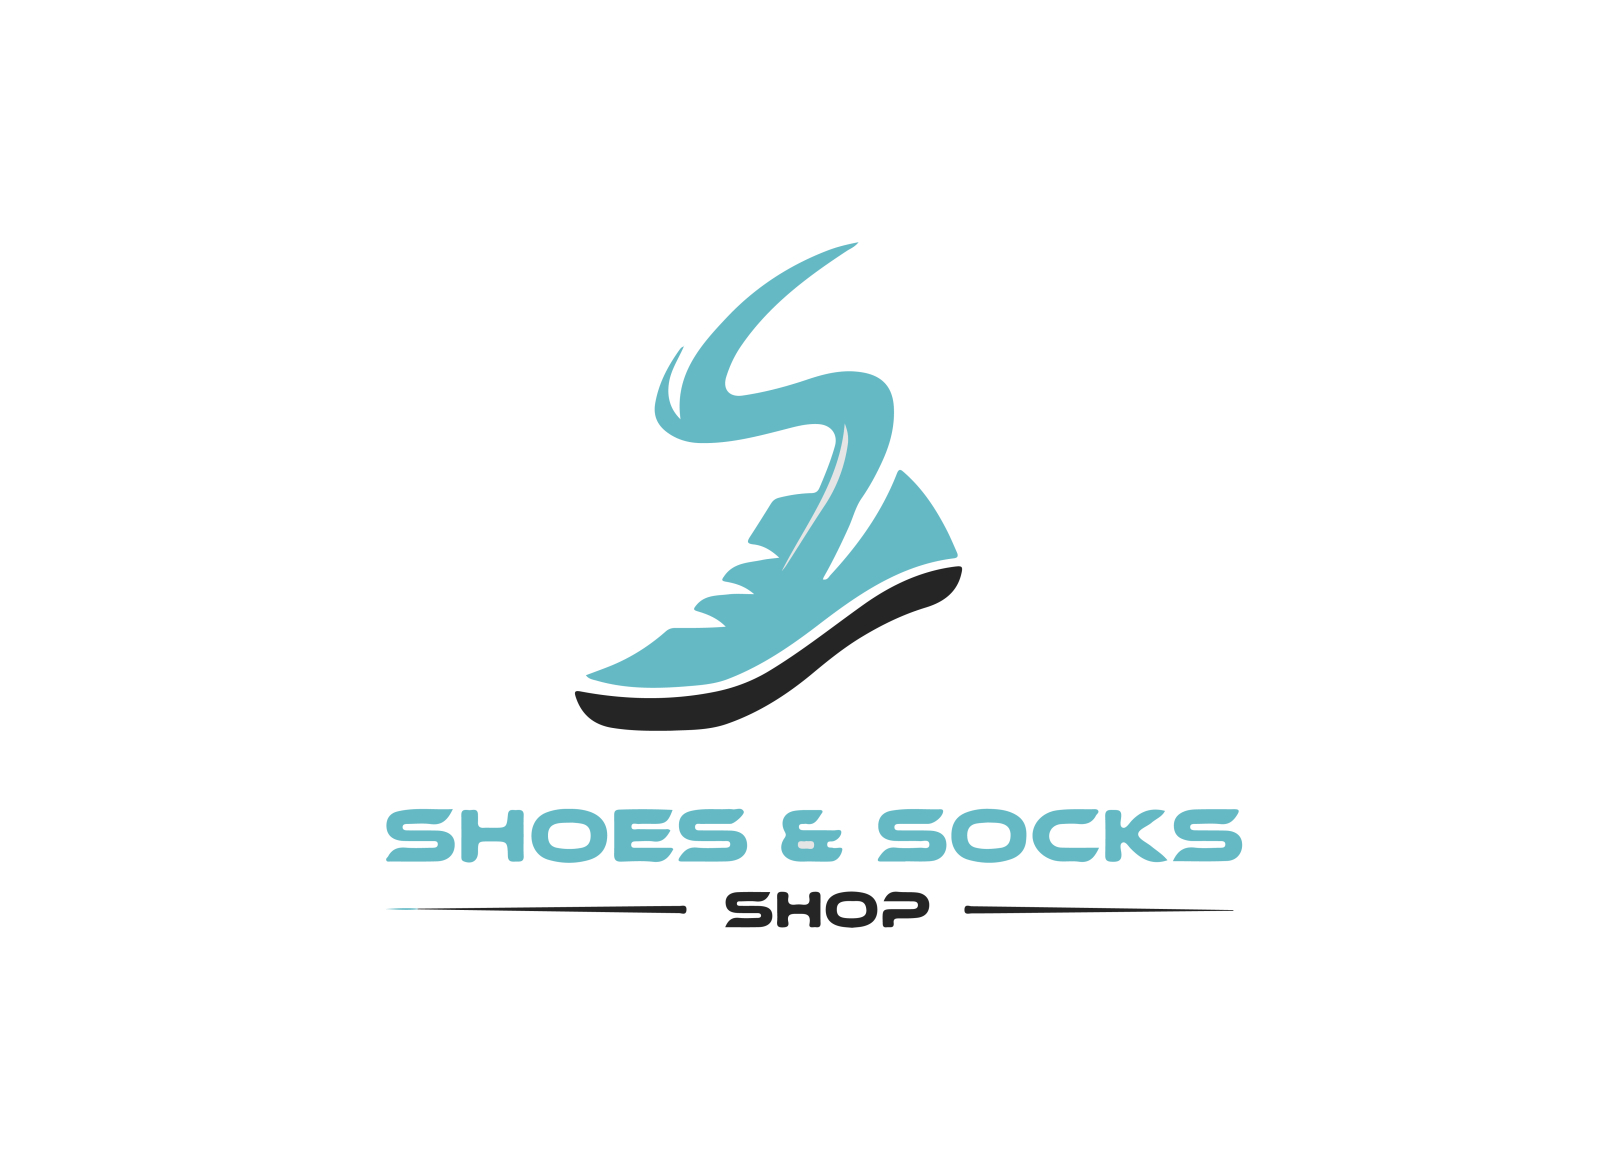 Shoes Socks by The Elev8 on Dribbble